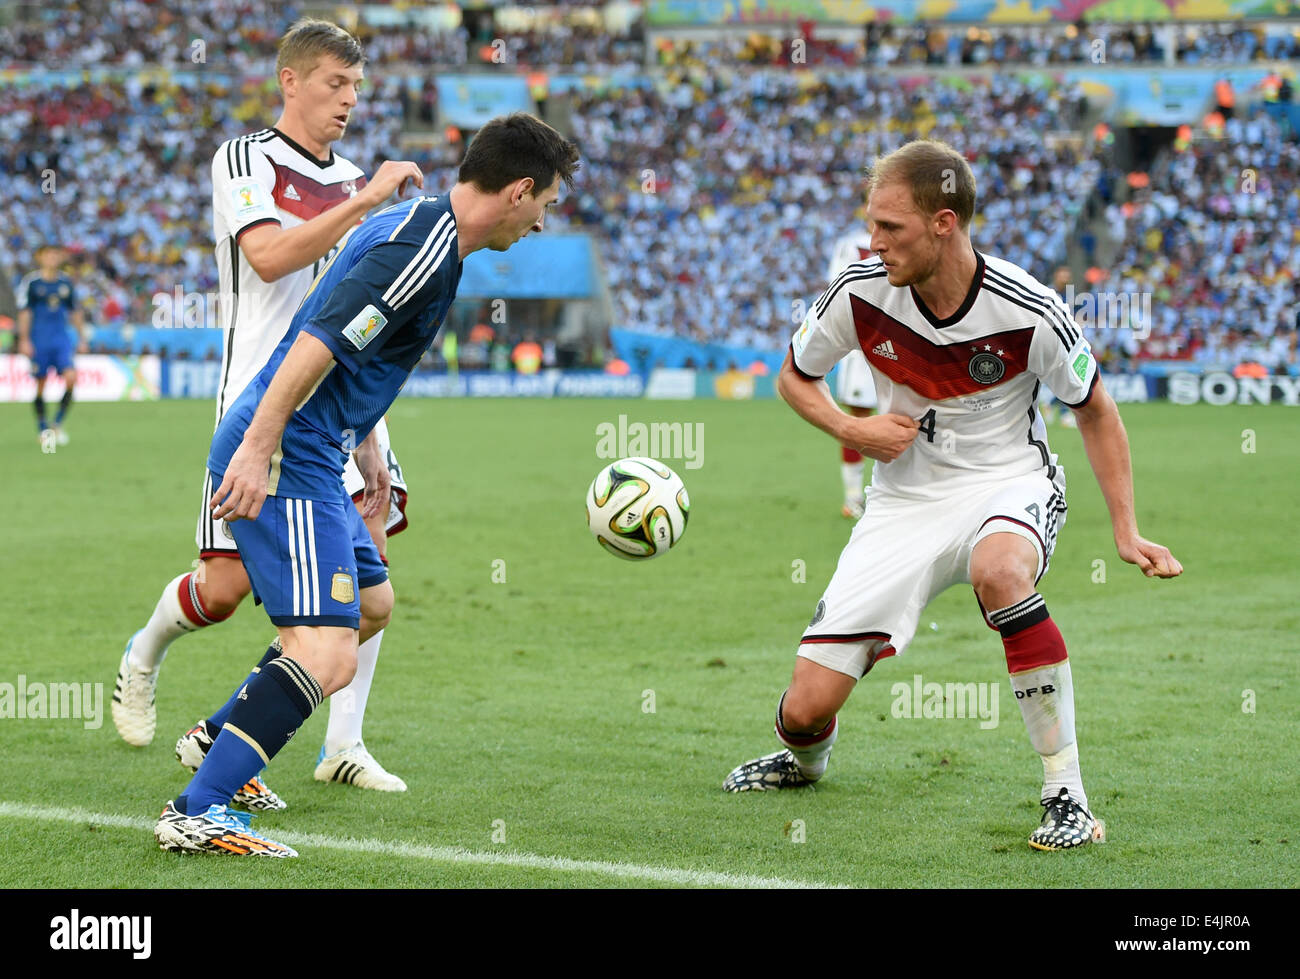 Rio de Janeiro, Brazil. 13th July, 2014. Benedikt Hoewedes (R) and Toni Kroos (L) of Germany and Lionel Messi of Argentina vie for the ball during the FIFA World Cup 2014 final soccer match between Germany and Argentina at the Estadio do Maracana in Rio de Janeiro, Brazil, 13 July 2014. Photo: Marcus Brandt/dpa/Alamy Live News Stock Photo